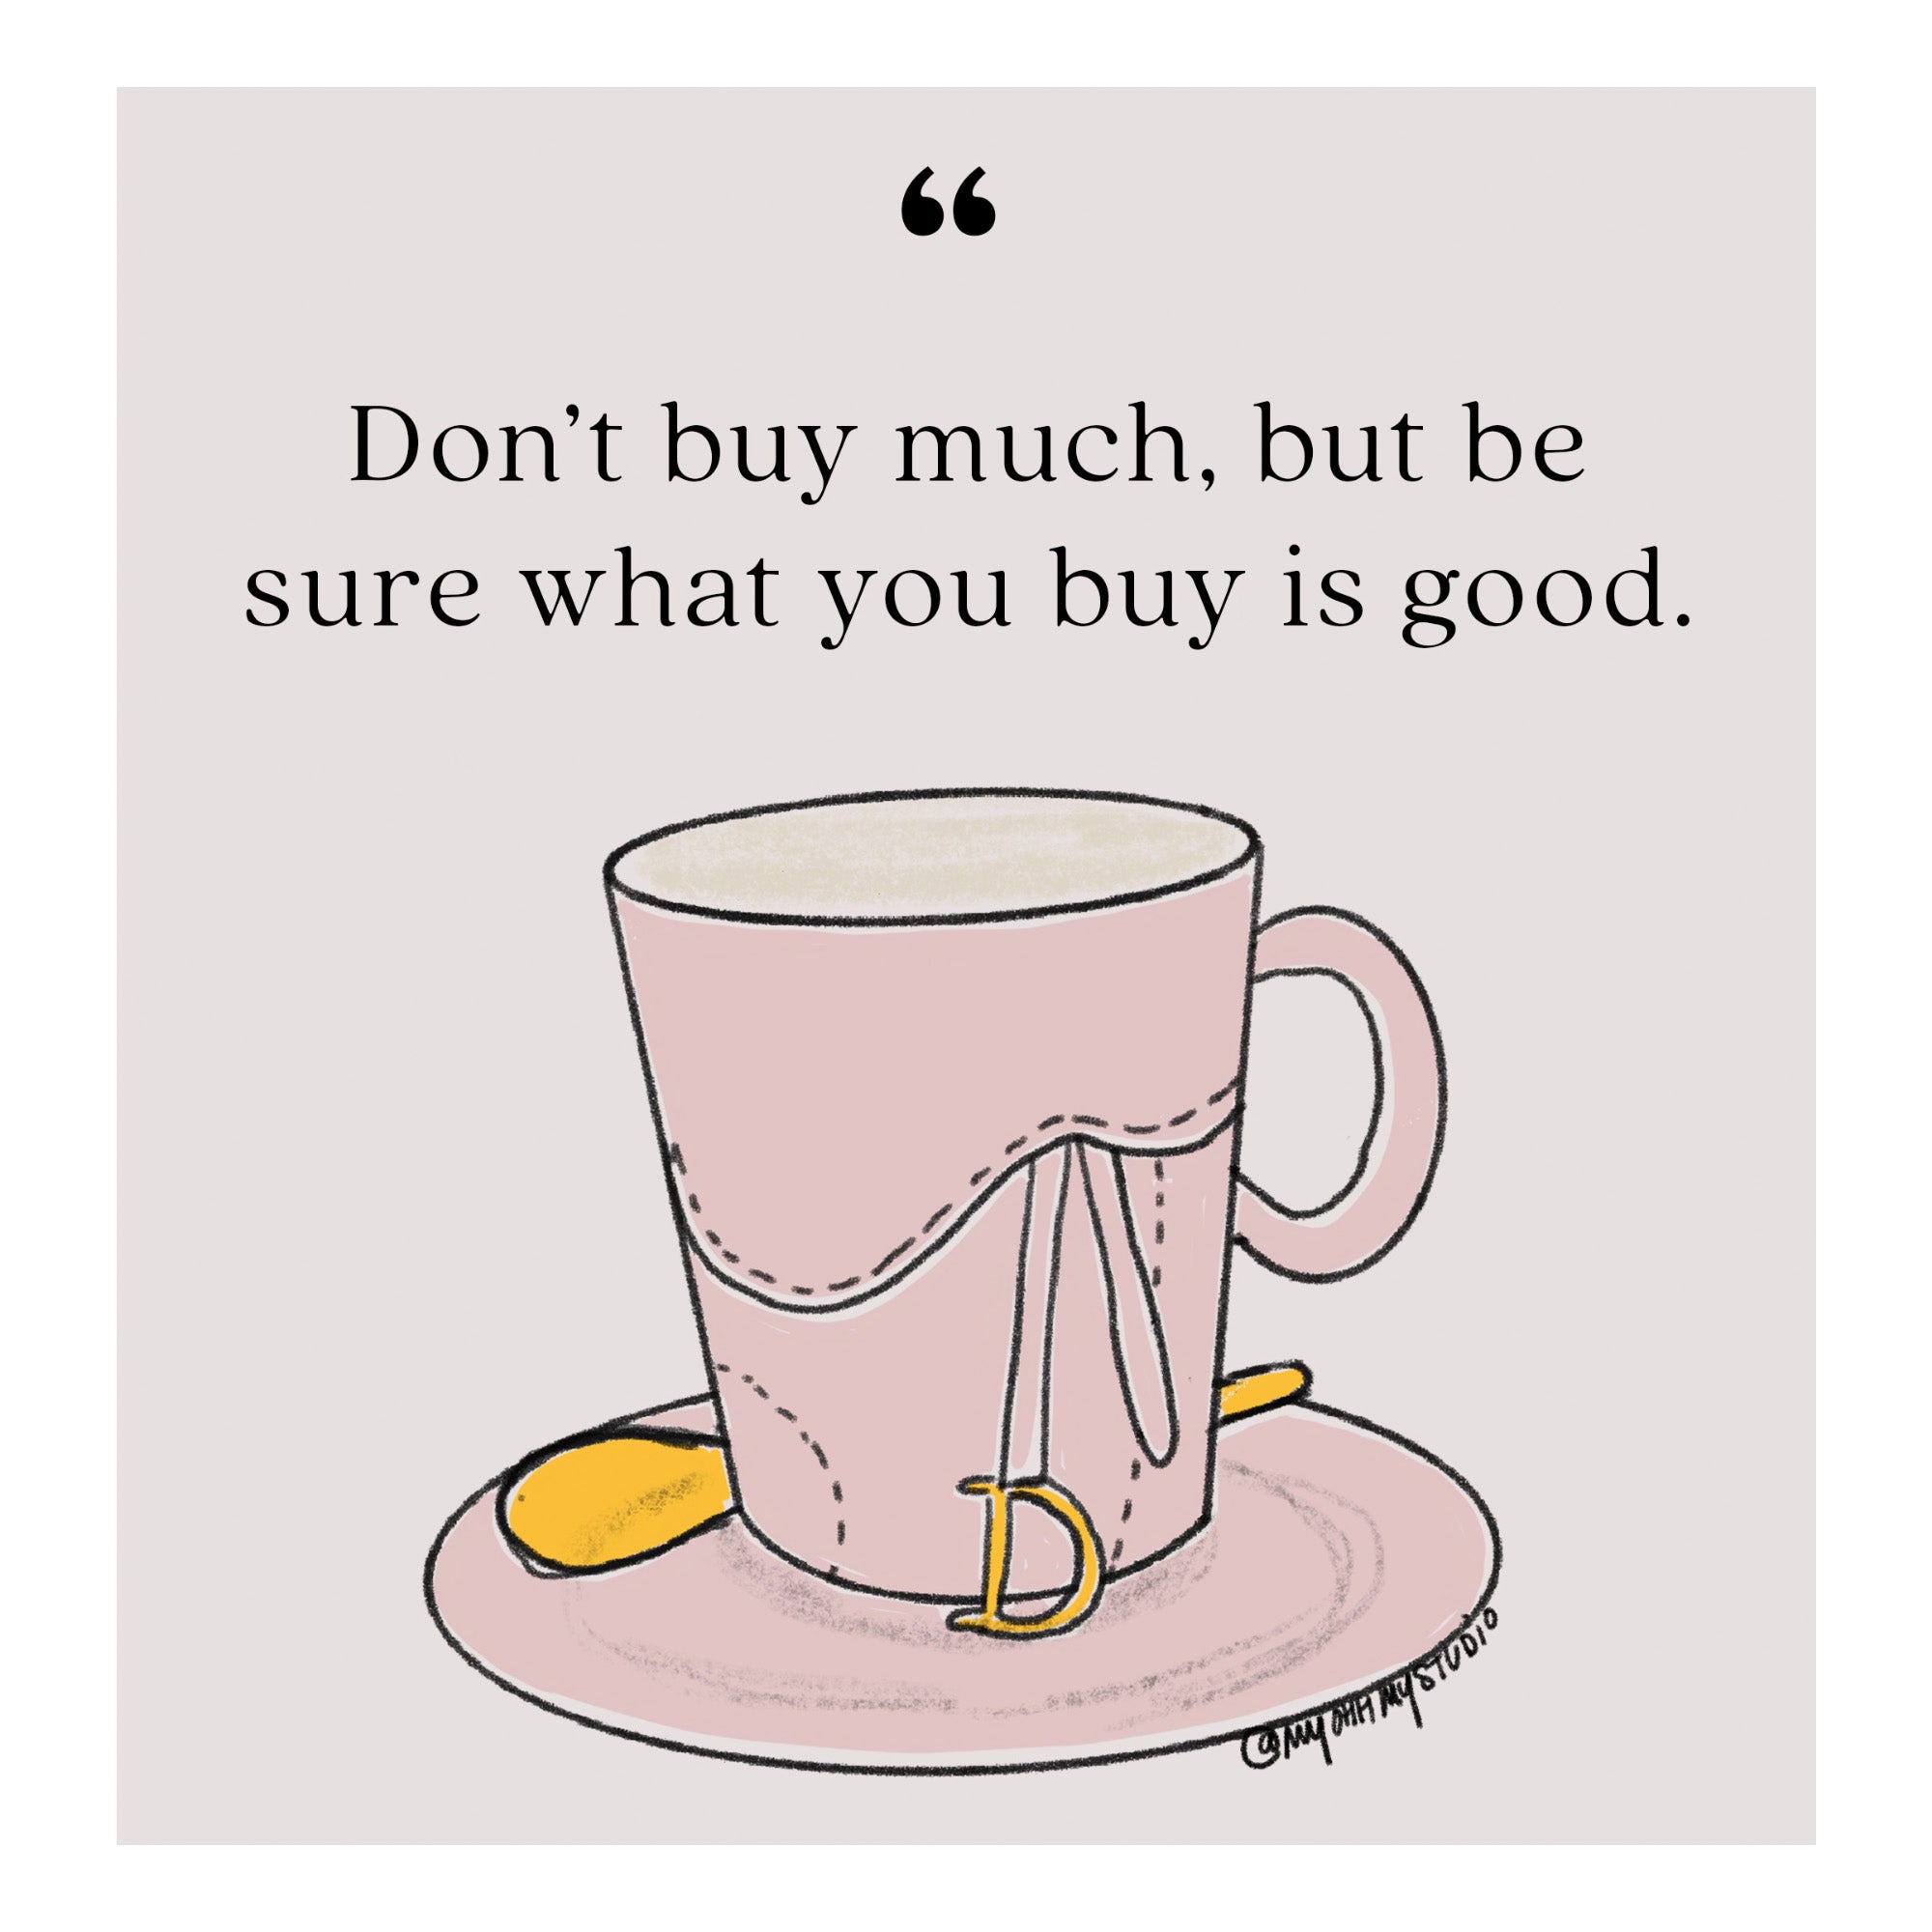 "Don't buy much, but be sure what you buy is good" Print